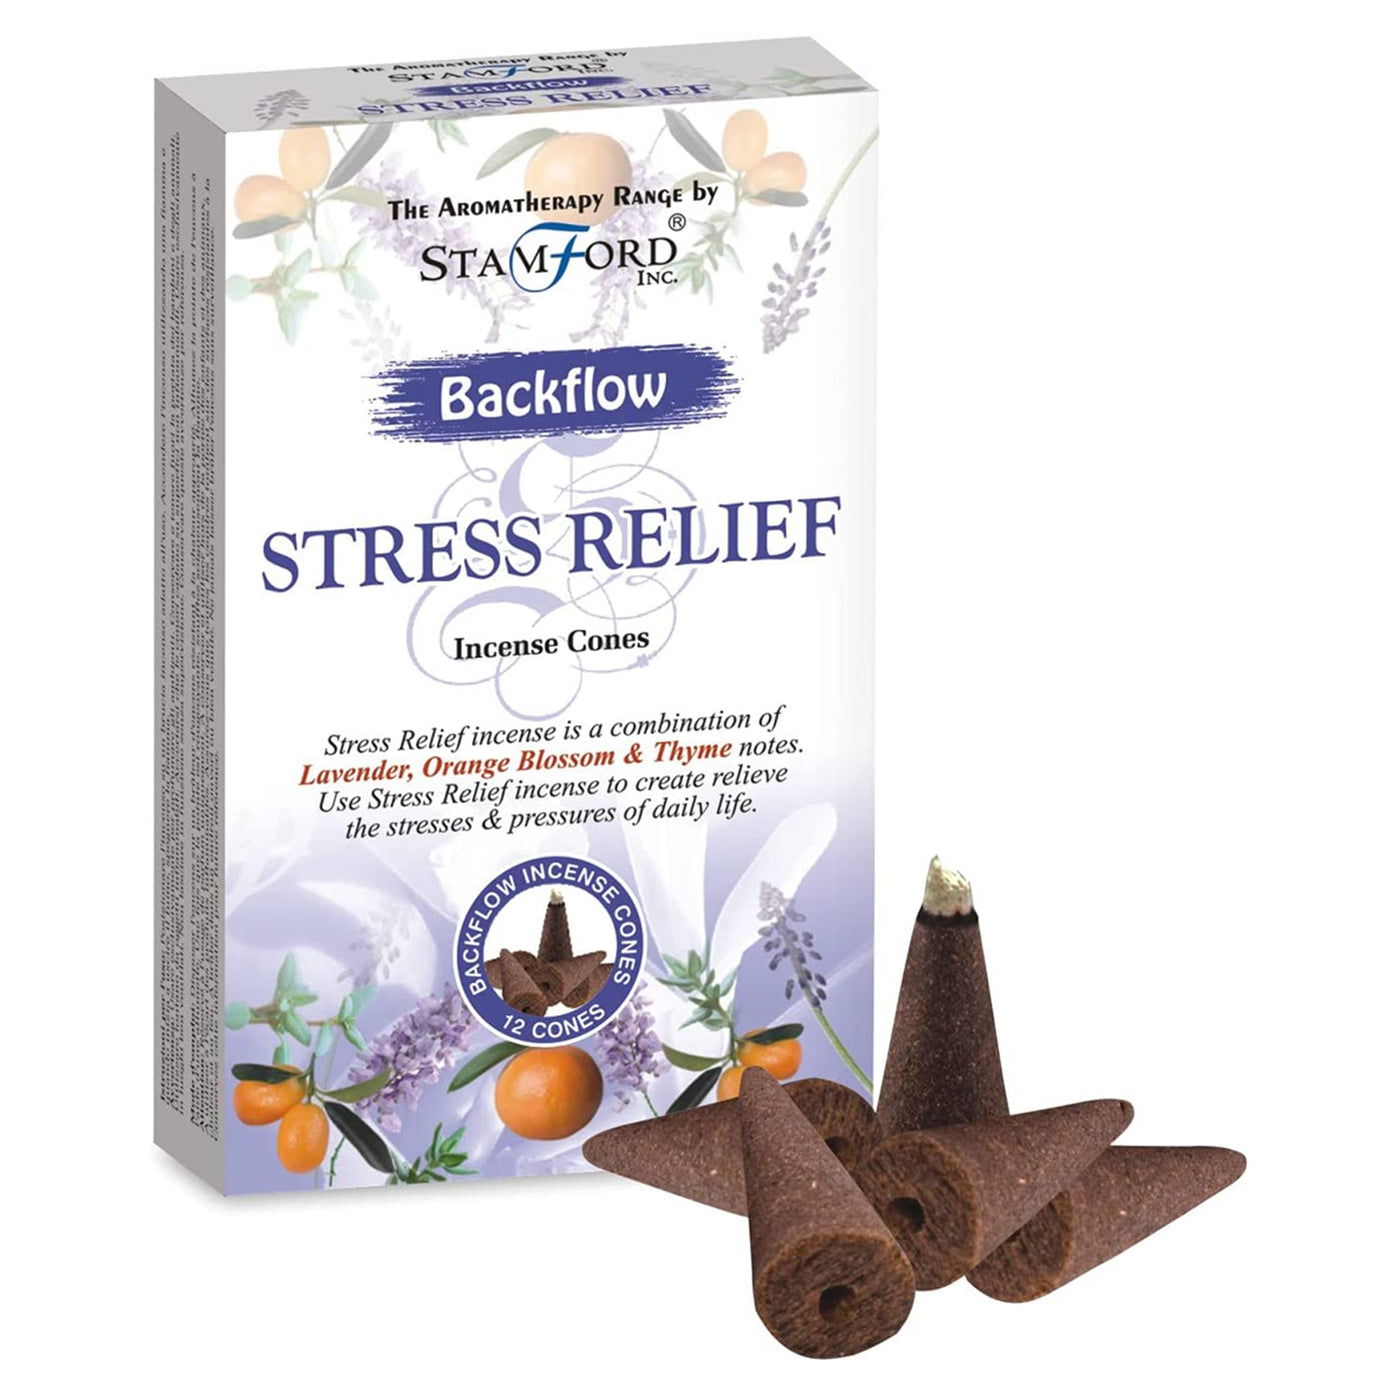 Stamford Stress Relief Backflow Cones - Lavender Orange Blossom & Thyme.